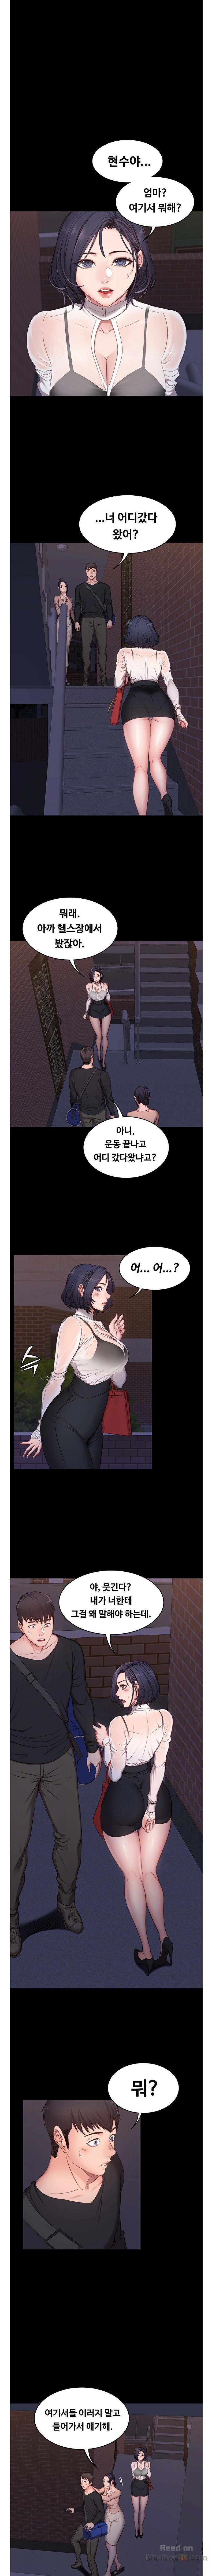 Fitness Raw - Chapter 3 Page 1